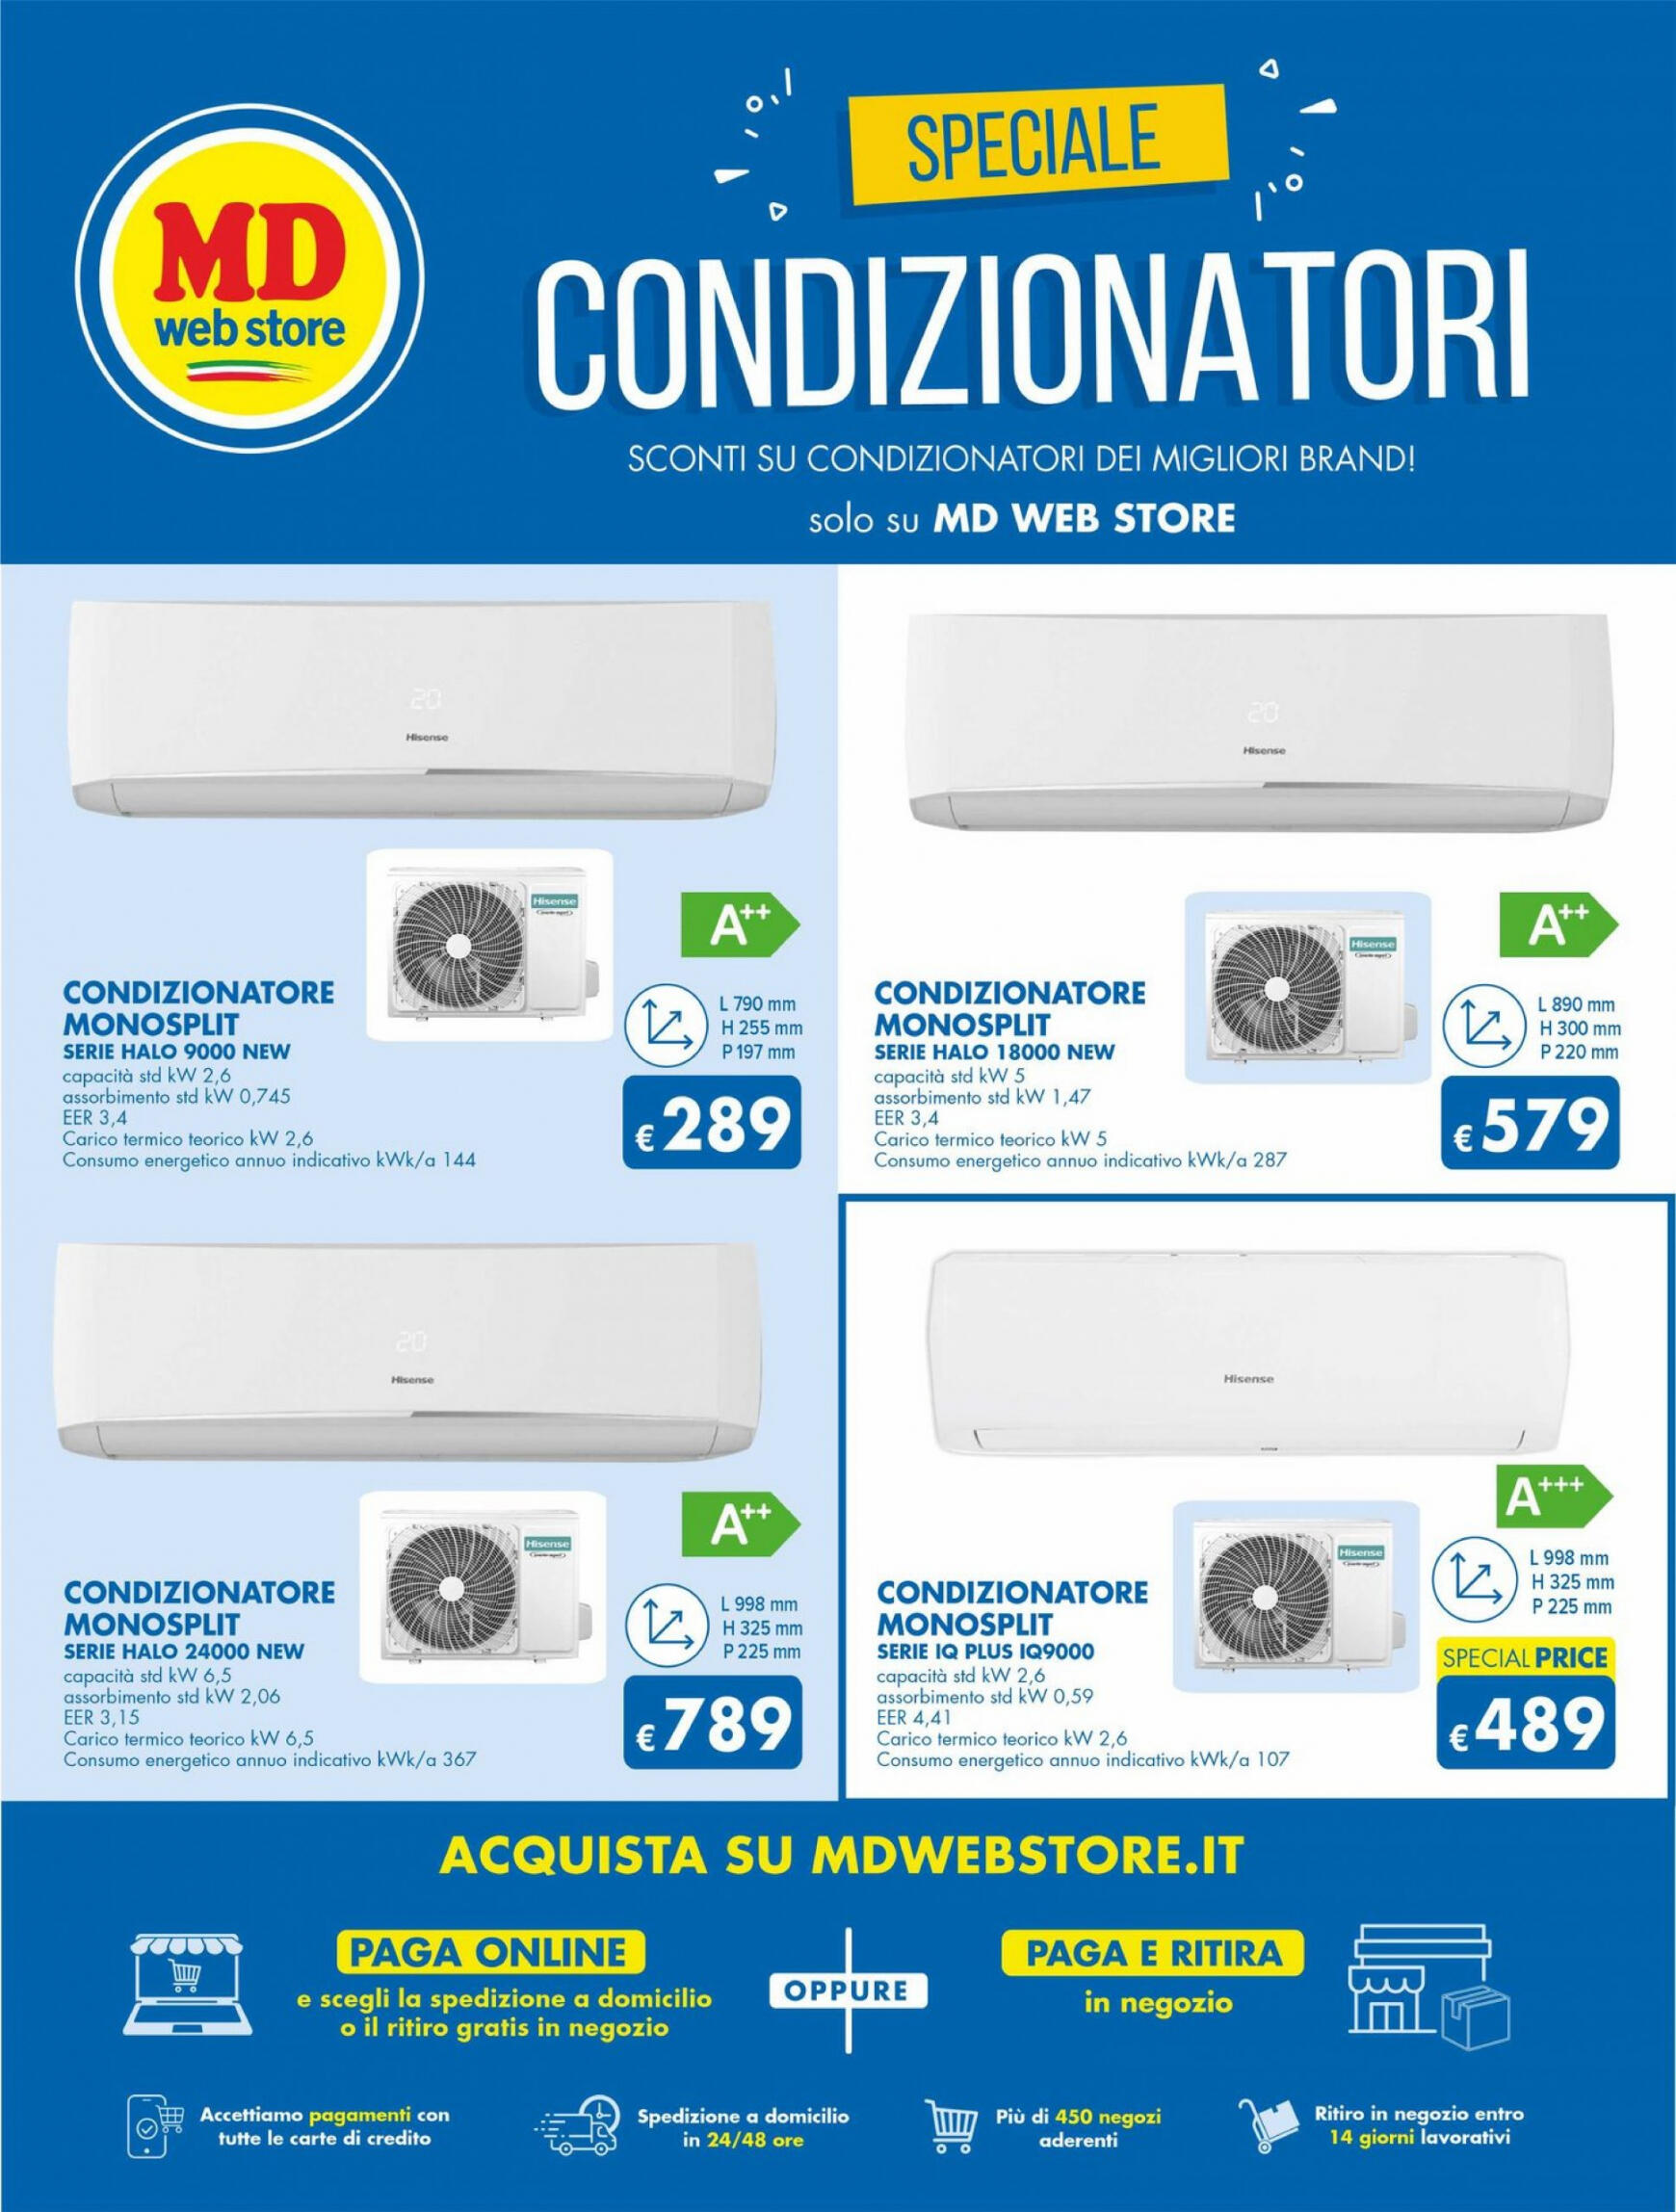 md-discount - Nuovo volantino MD - MD Discount 07.05. - 19.05. - page: 26